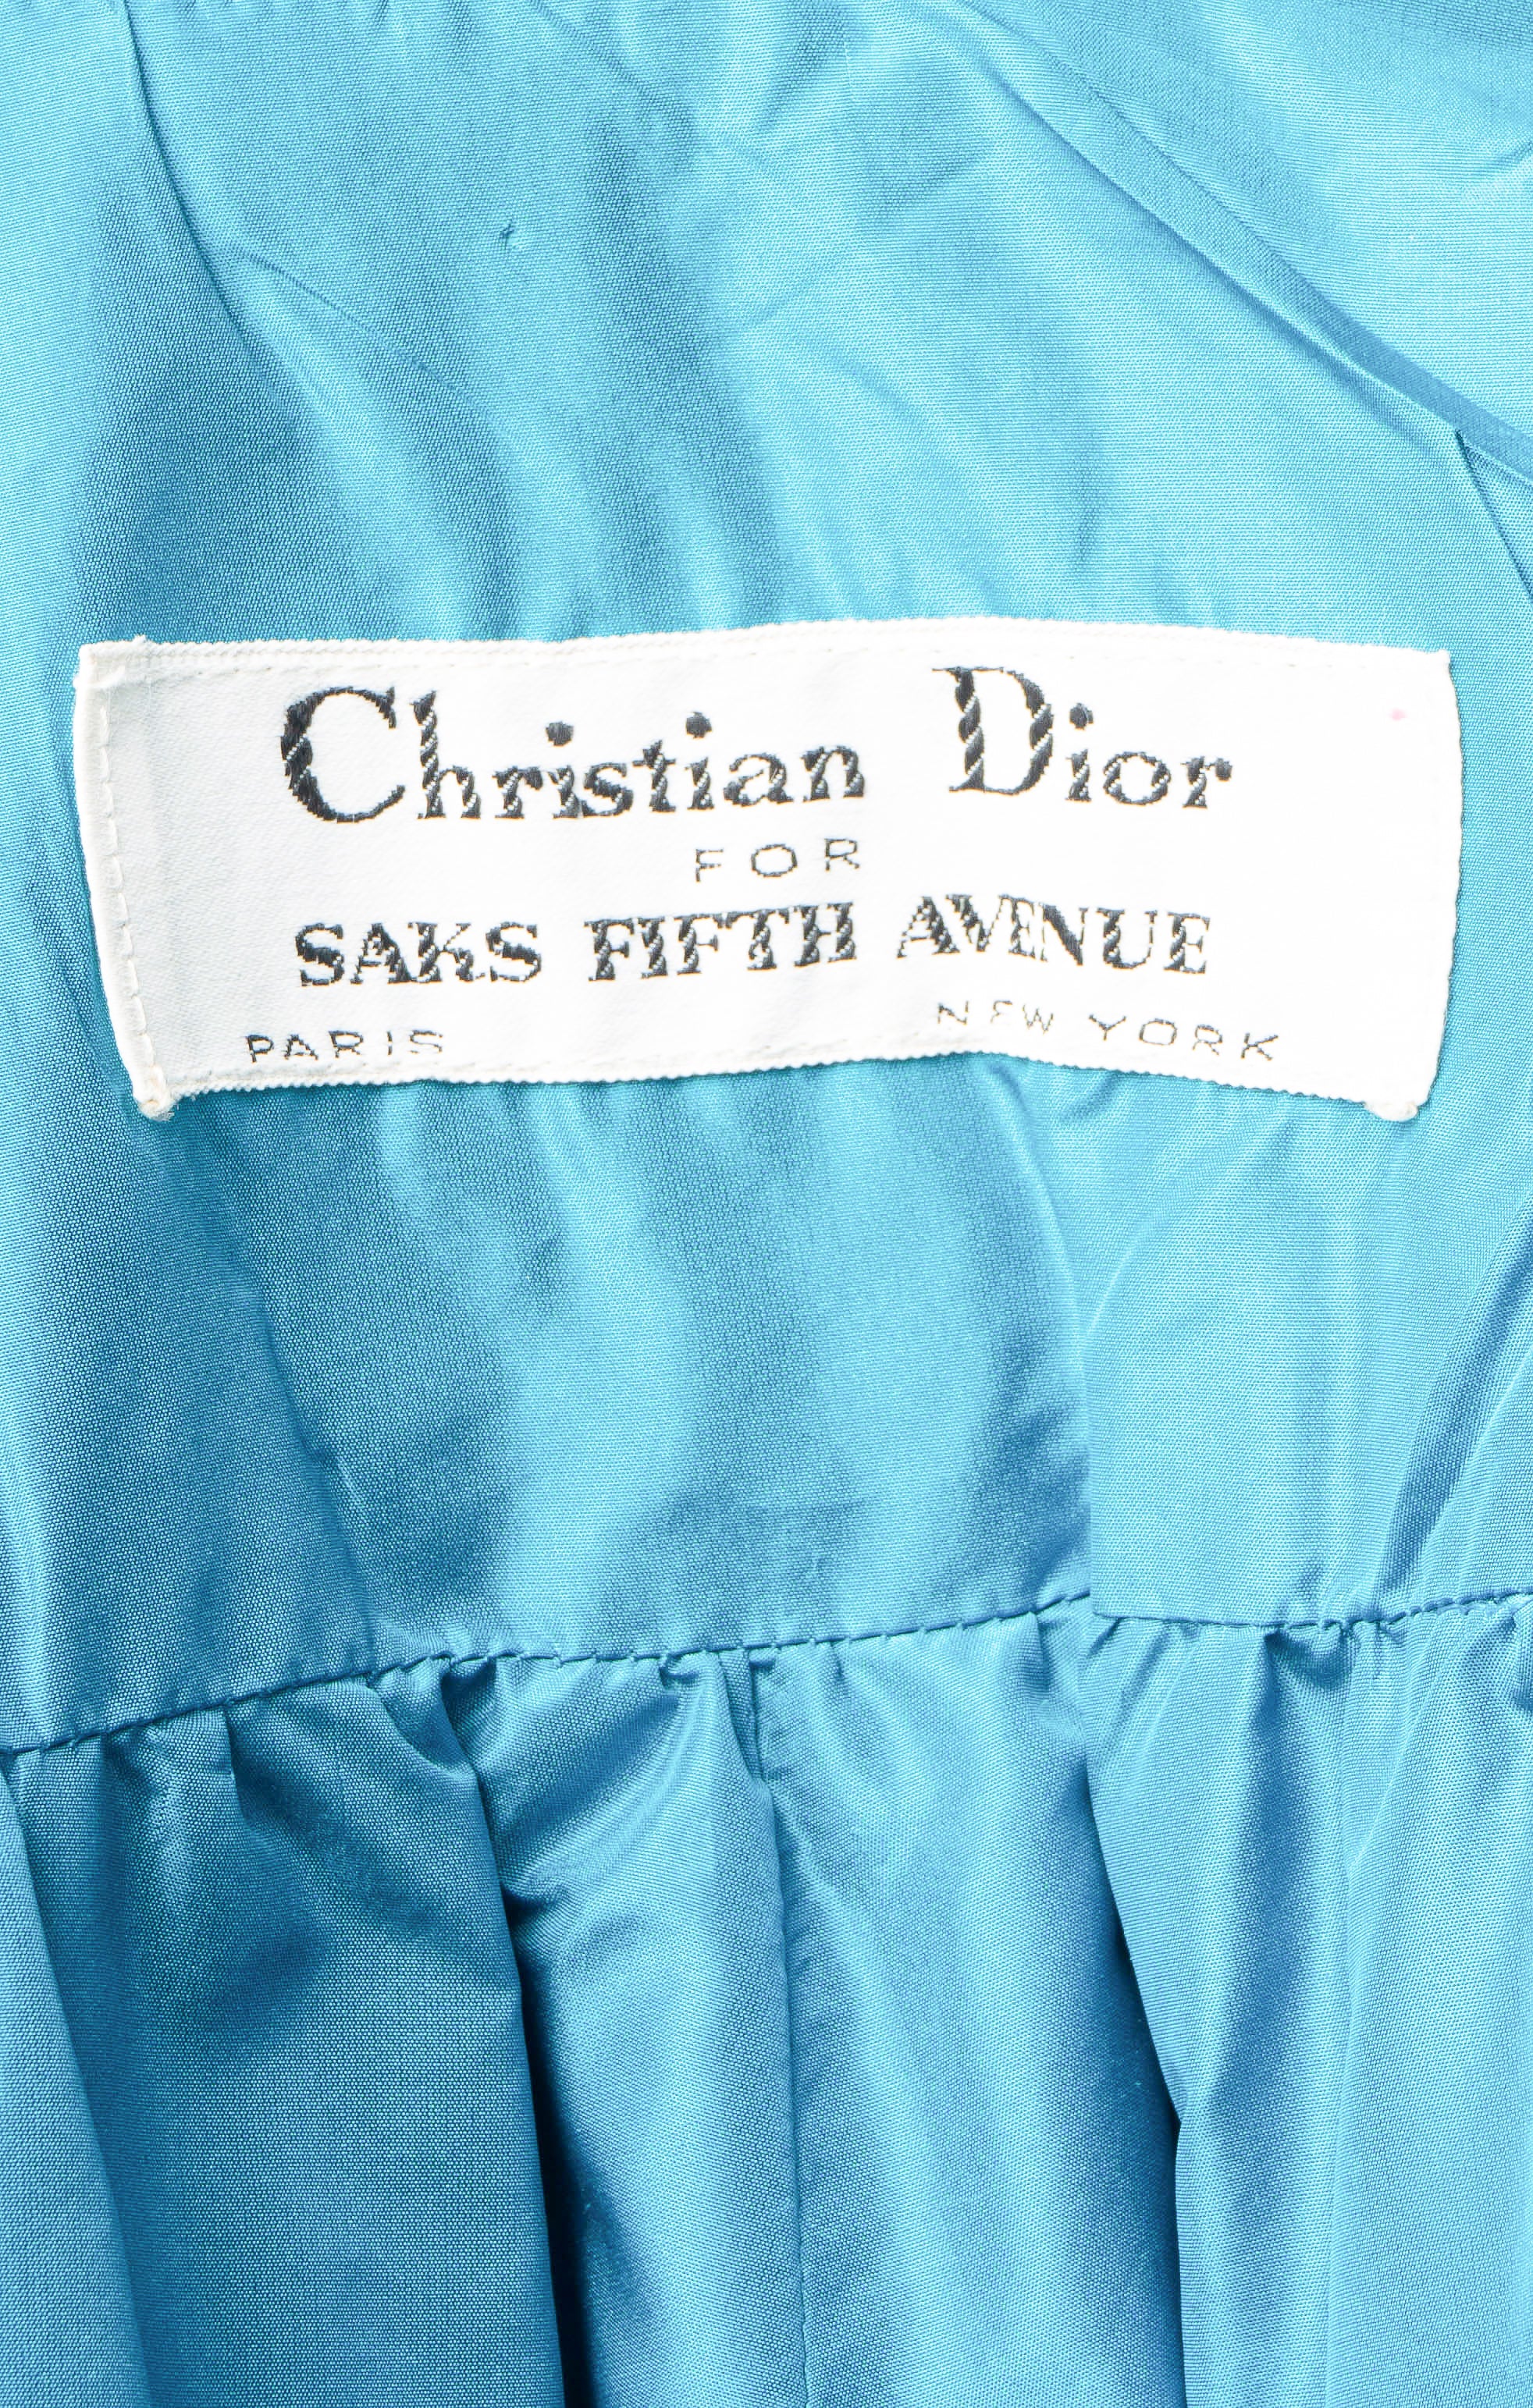 VINTAGE CHRISTIAN DIOR (RARE) Coat Size: No size tags, fits like M/L